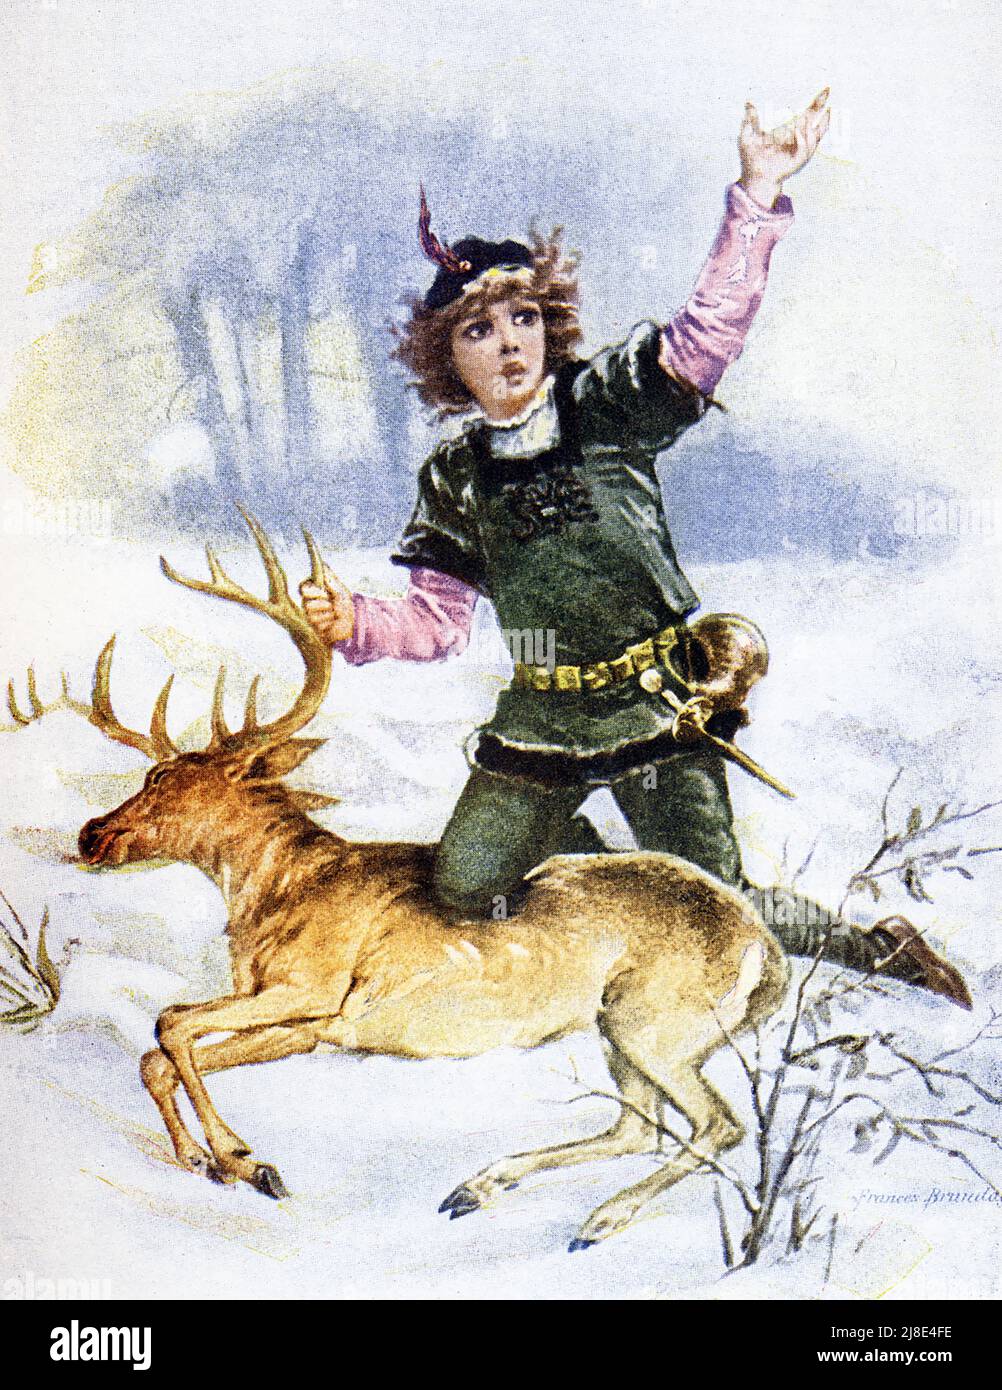 This image, dating to around 1899, shows the first Prince of Wales as a young boy hunting a deer. The first English Prince of Wales (later Edward II) was born at Caernarfon on April 25, 1284, the fourth and eldest surviving son of Edward I and Eleanor of Castille. On the completion of his father's conquest of the province, he was created Prince of Wales on February 7, 1301, at the age of 16, at a parliament at Lincoln. Edward was married to Isabella (the “she-wolf of France”), daughter of Philip IV of France and Joan I of Navarre, Her son was the future Edward III. The art is by Frances Brunda Stock Photo